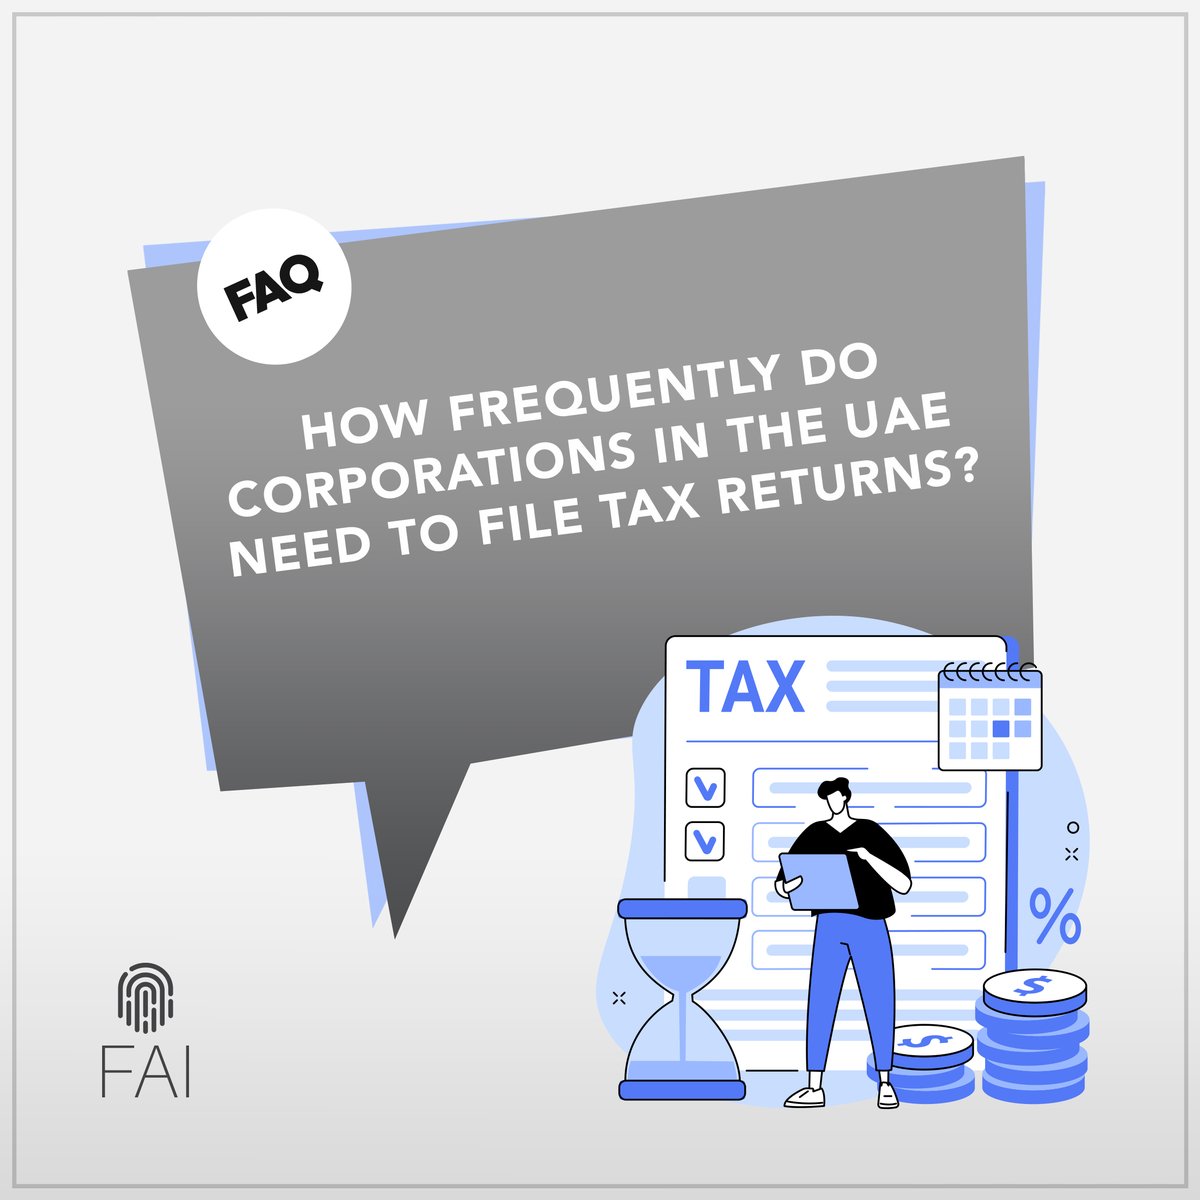 How Frequently Do Corporations in the UAE Need to File Tax Returns?
For UAE businesses;
- Corporate tax must be filed once a year.
- VAT must be filed quarterly.
- Excise tax must be filed monthly.

Stay ahead and stay compliant!

#FAI #FAIconsulting #forensicaccounting